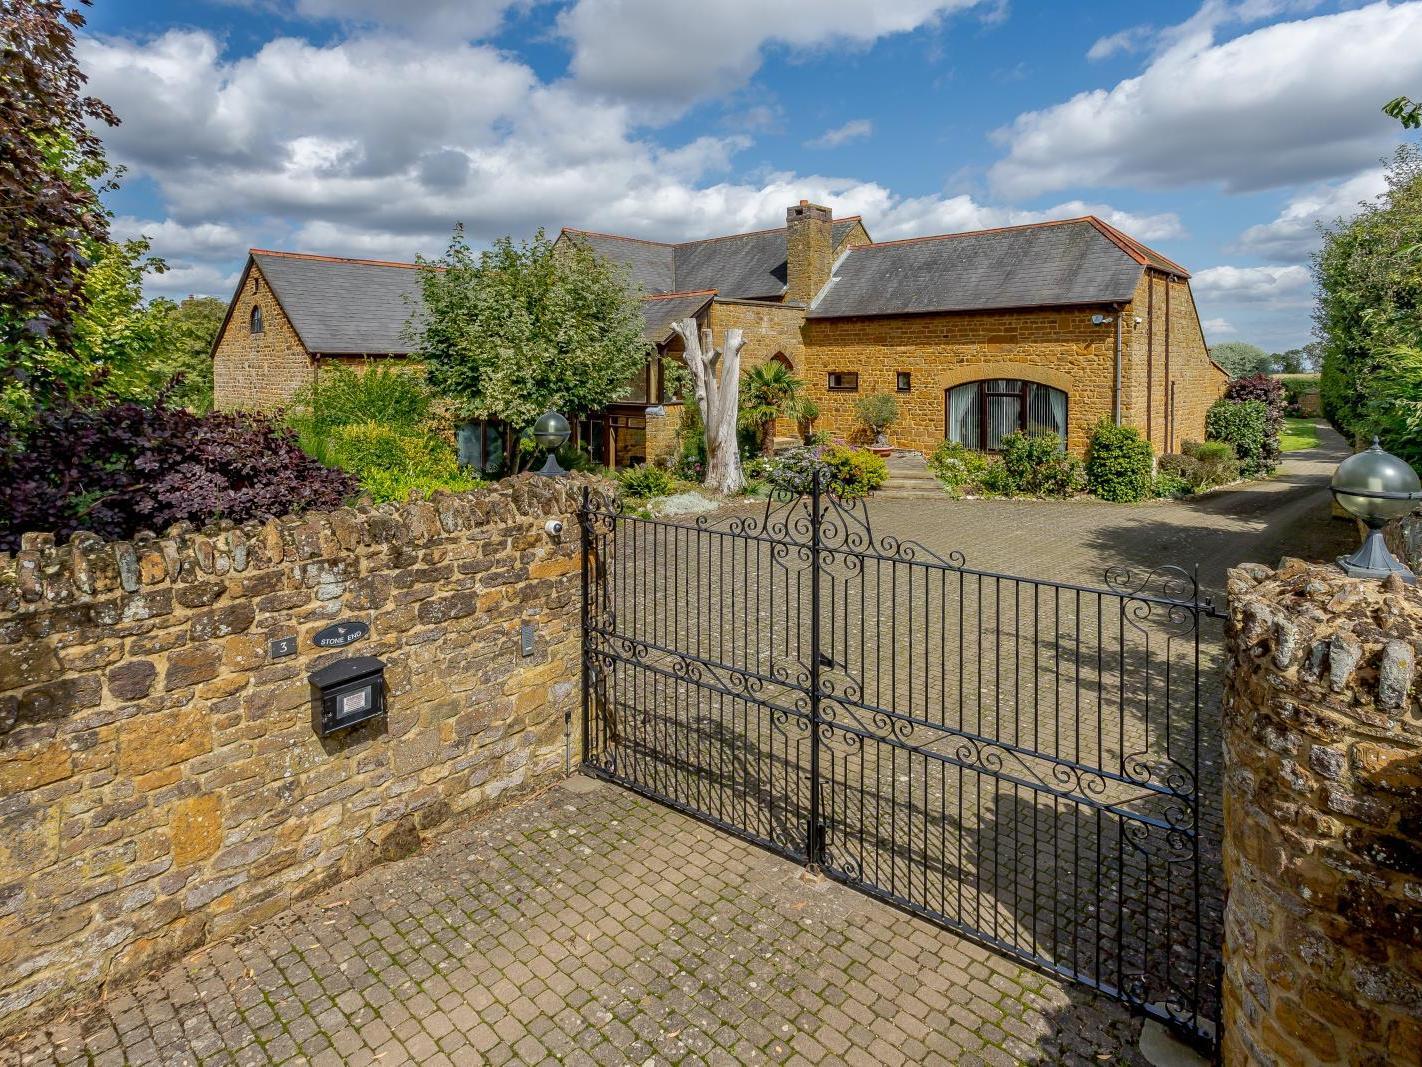 The house has electric gates. Photo: Fine and Country.